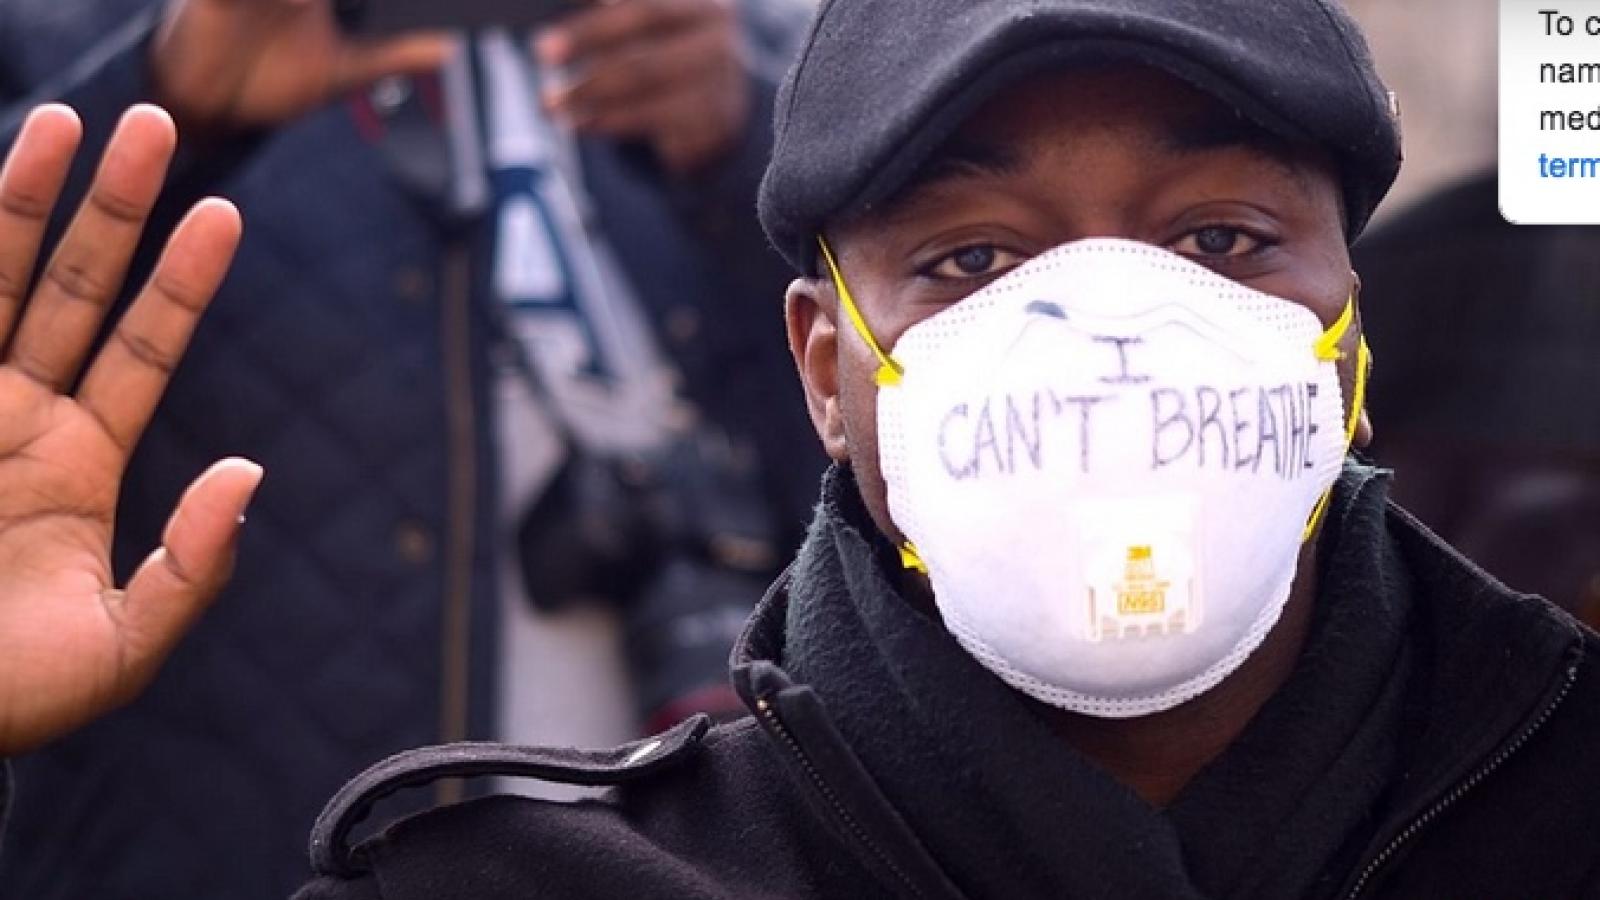 I Can't Breathe: Protestor at Black Lives Matter march (from Medium)